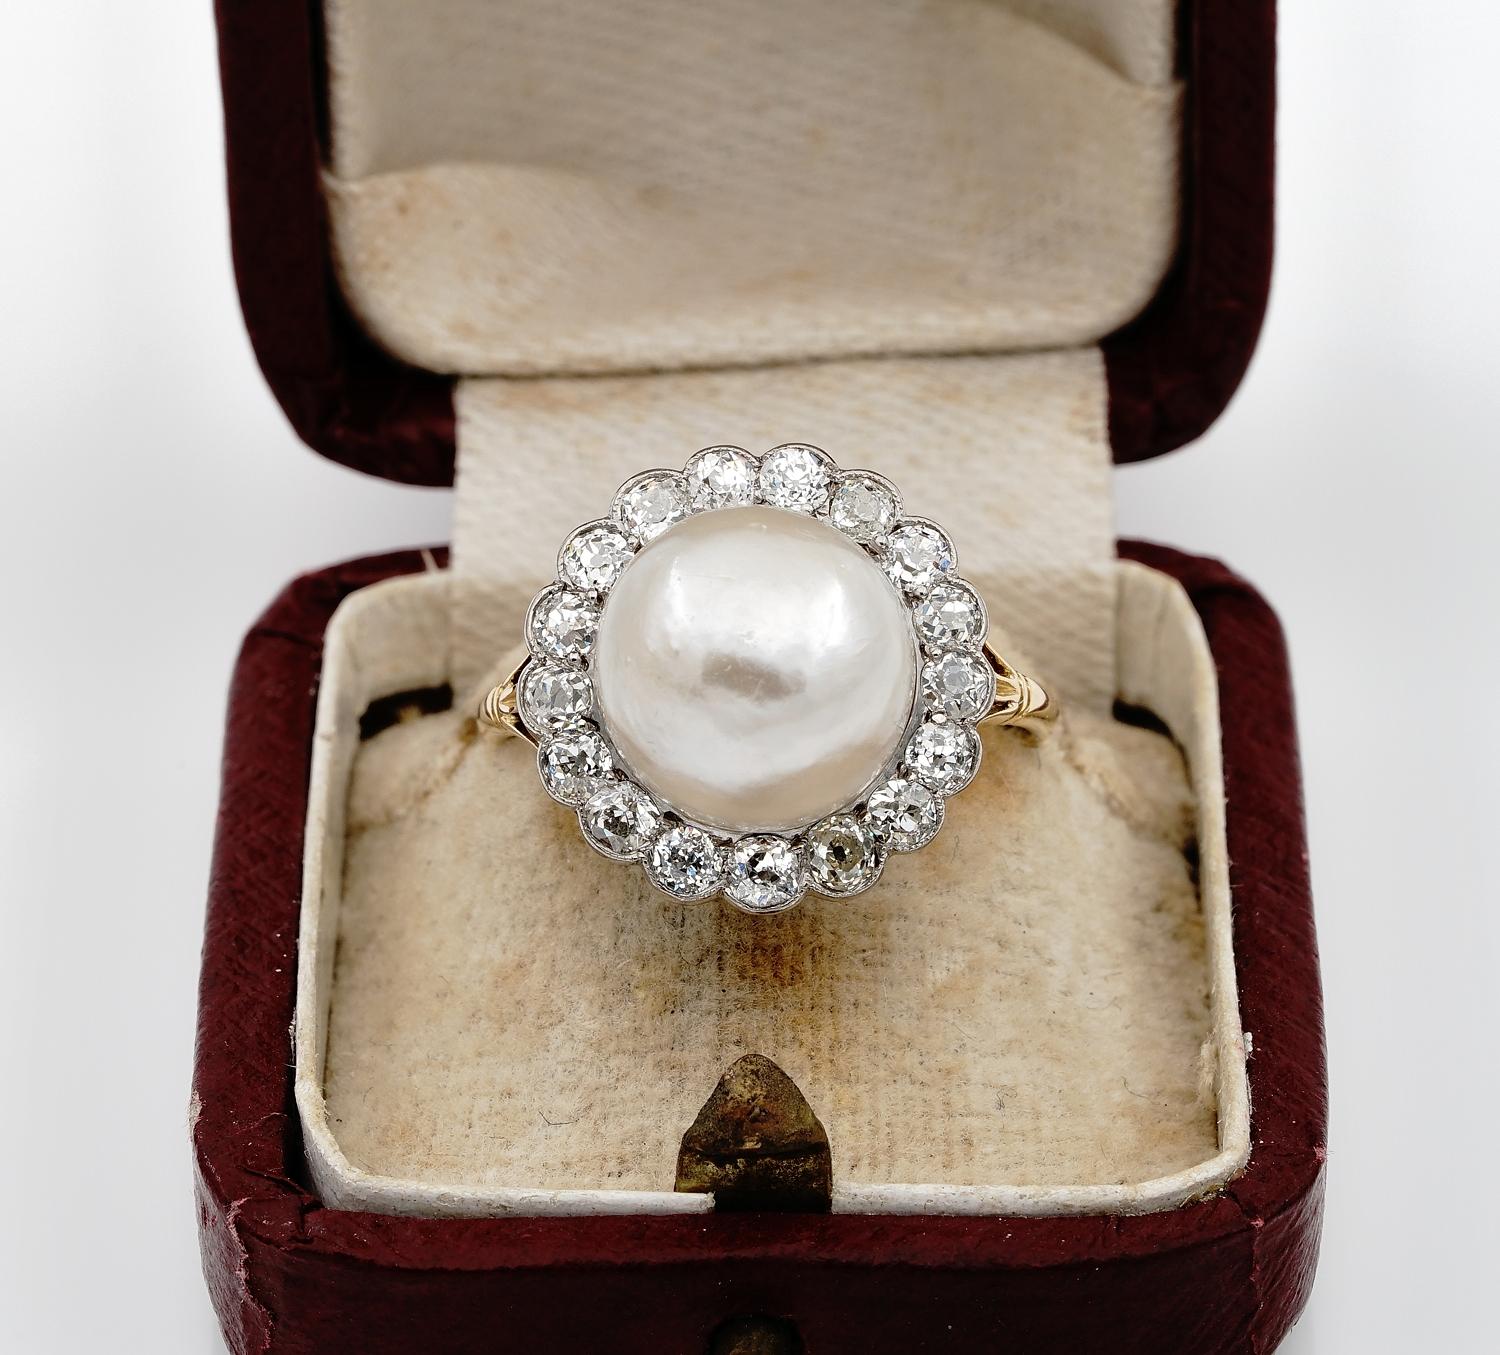 The Queen of Seas

Prized for millennia, pearls are organic gems with strong associations with the Moon, great value, and weddings
Emblem of Purity, rewarded in history by Kings and Queens
Rare and extremely fine is this pure Edwardian ring, 1900